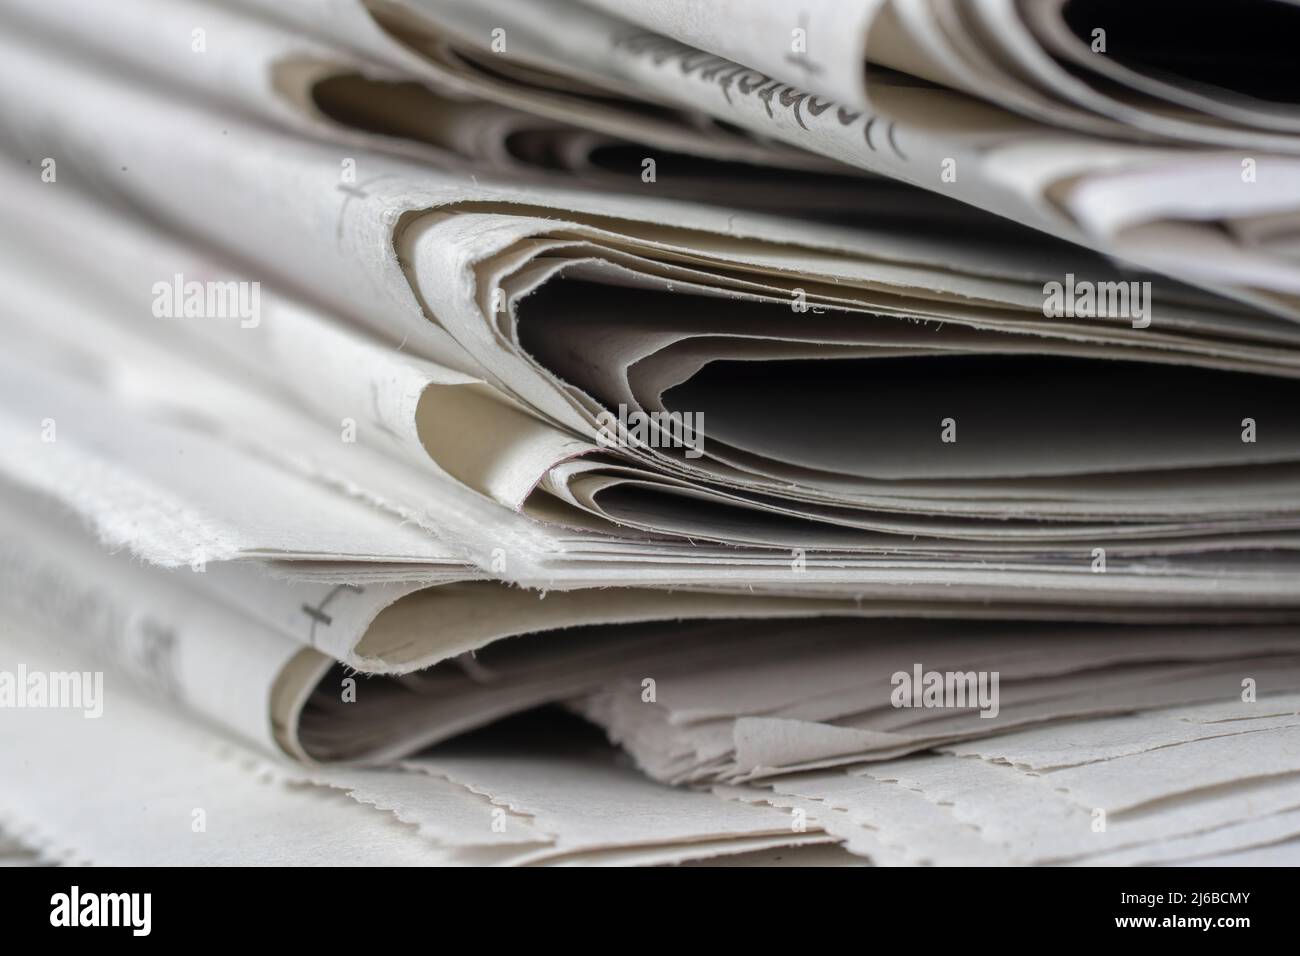 Macro shot of a stack of newspapers. The newspapers are folded and the articles are not legible Stock Photo